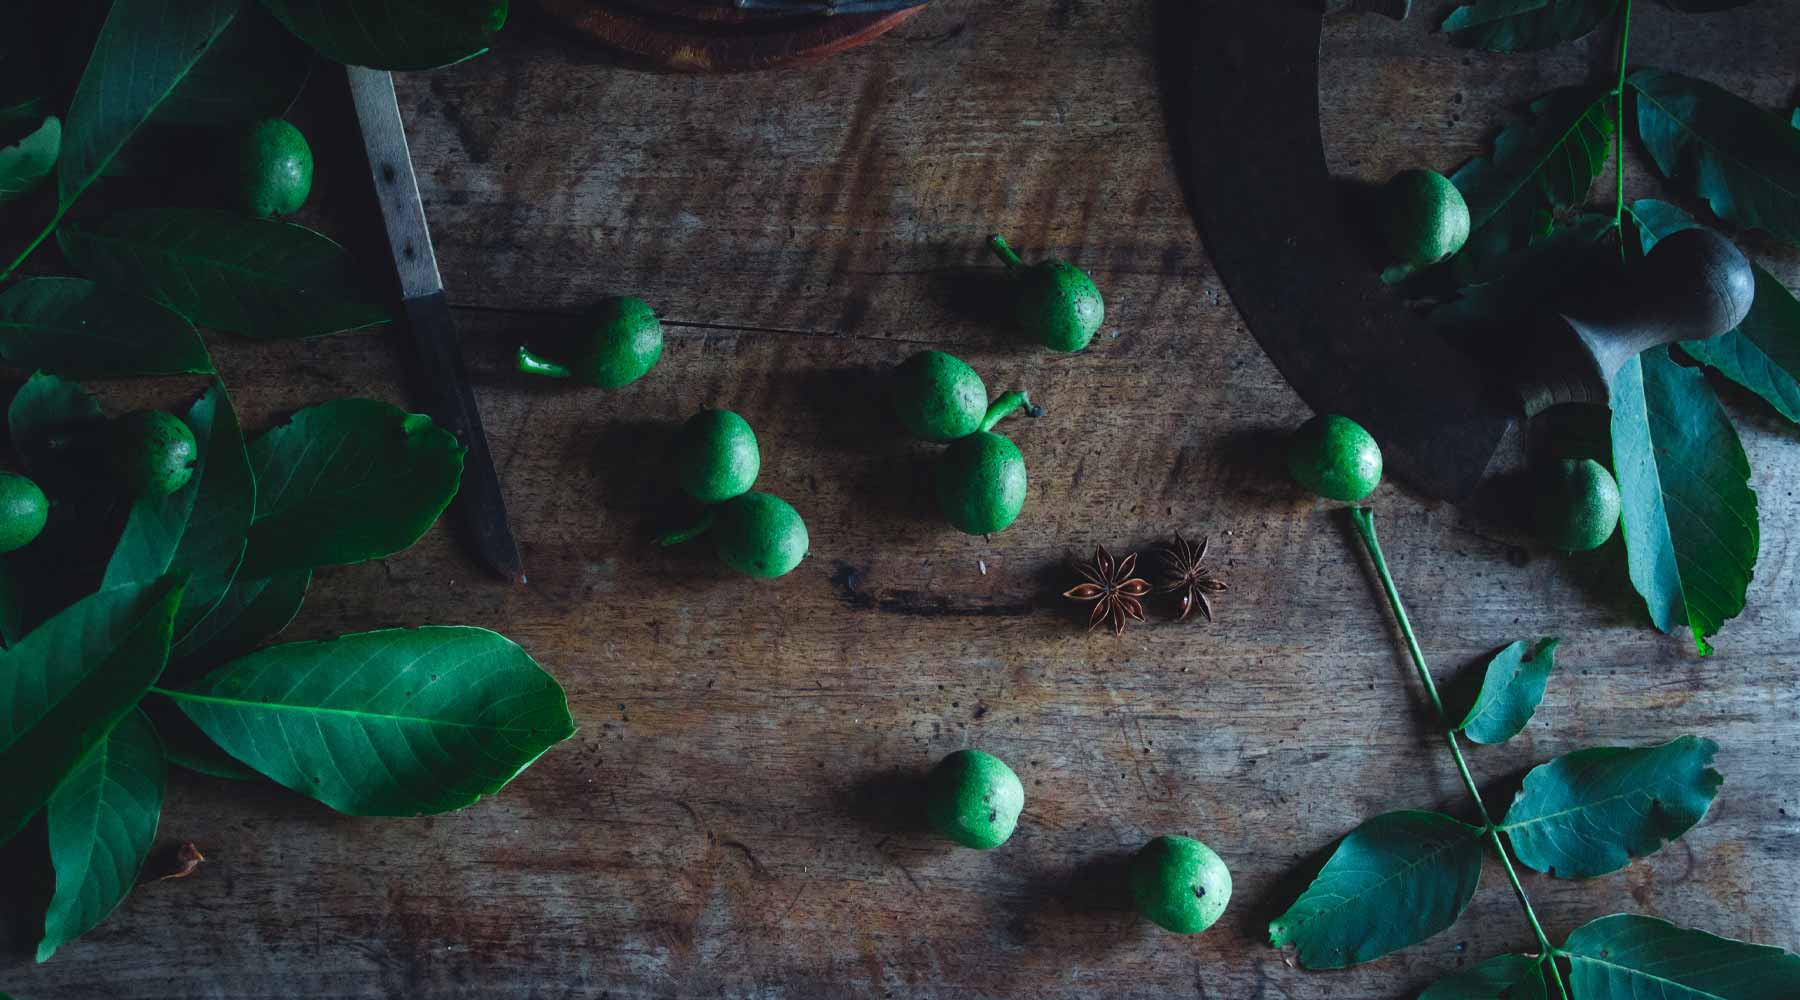 Green walnuts on the table